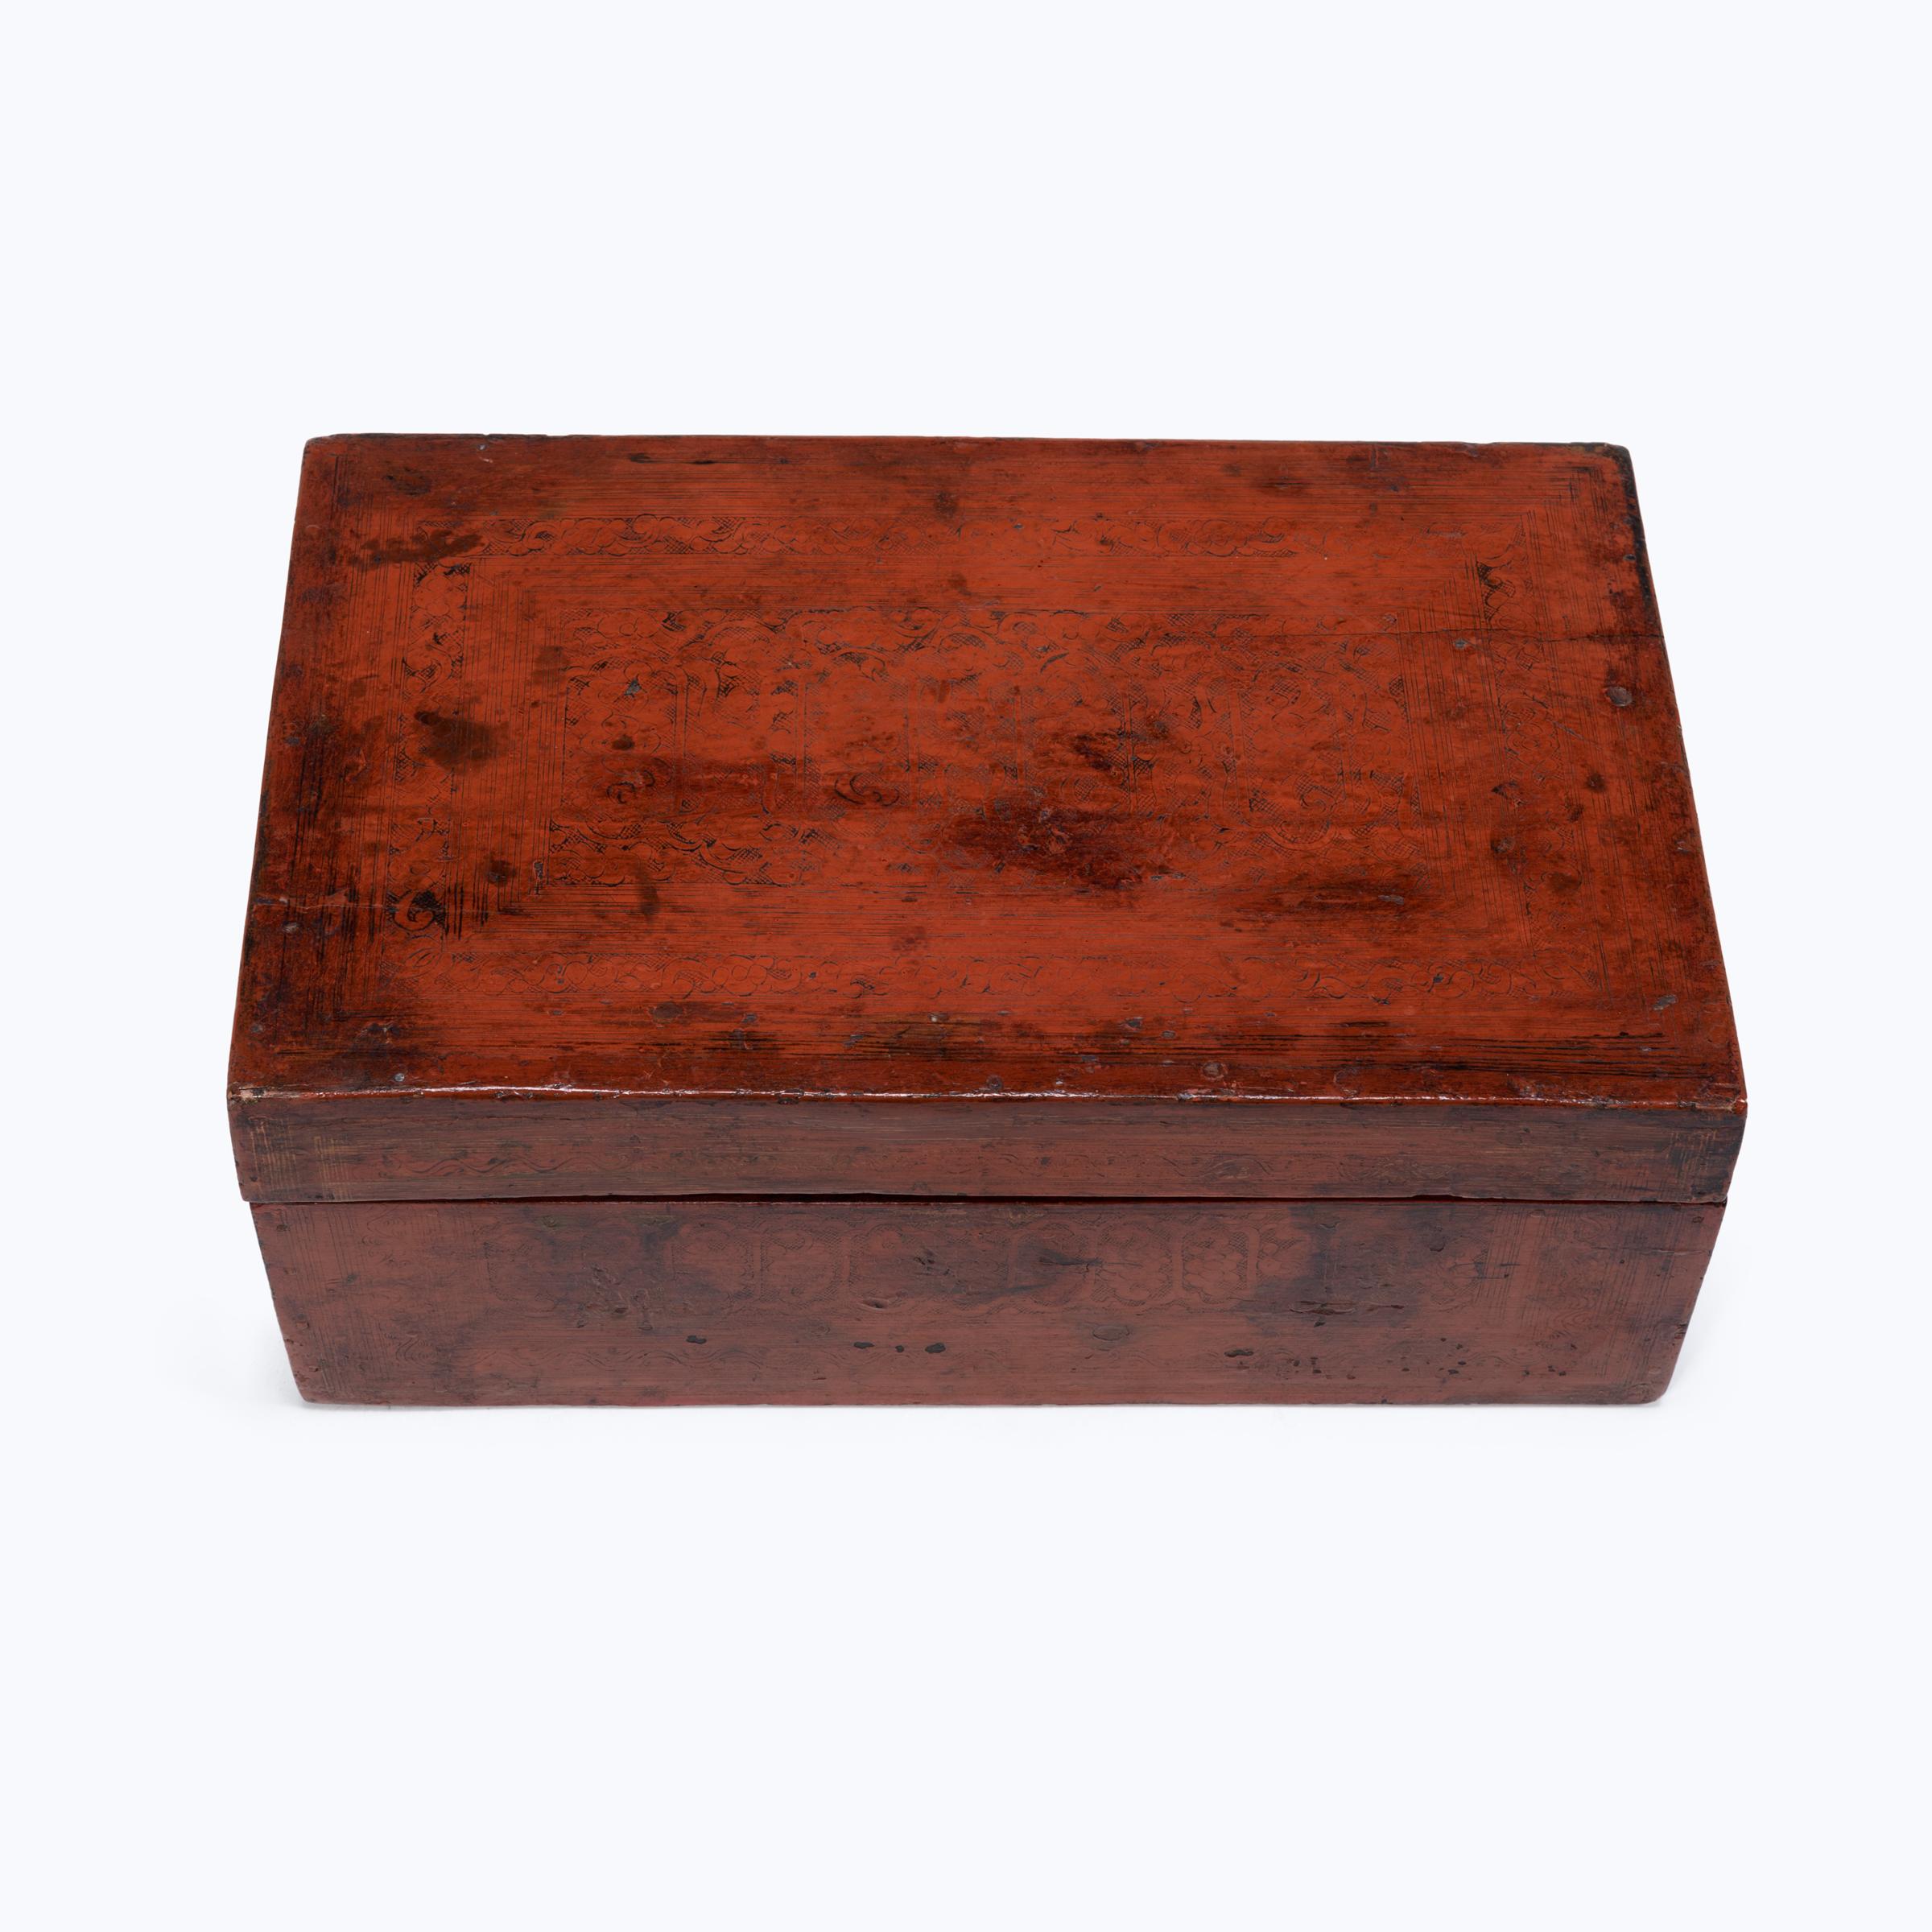 Crafted in early 20th century Burma, this rectangular box is cloaked in layer upon layer of brilliant red-orange cinnabar lacquer. Decorated in a style known as 